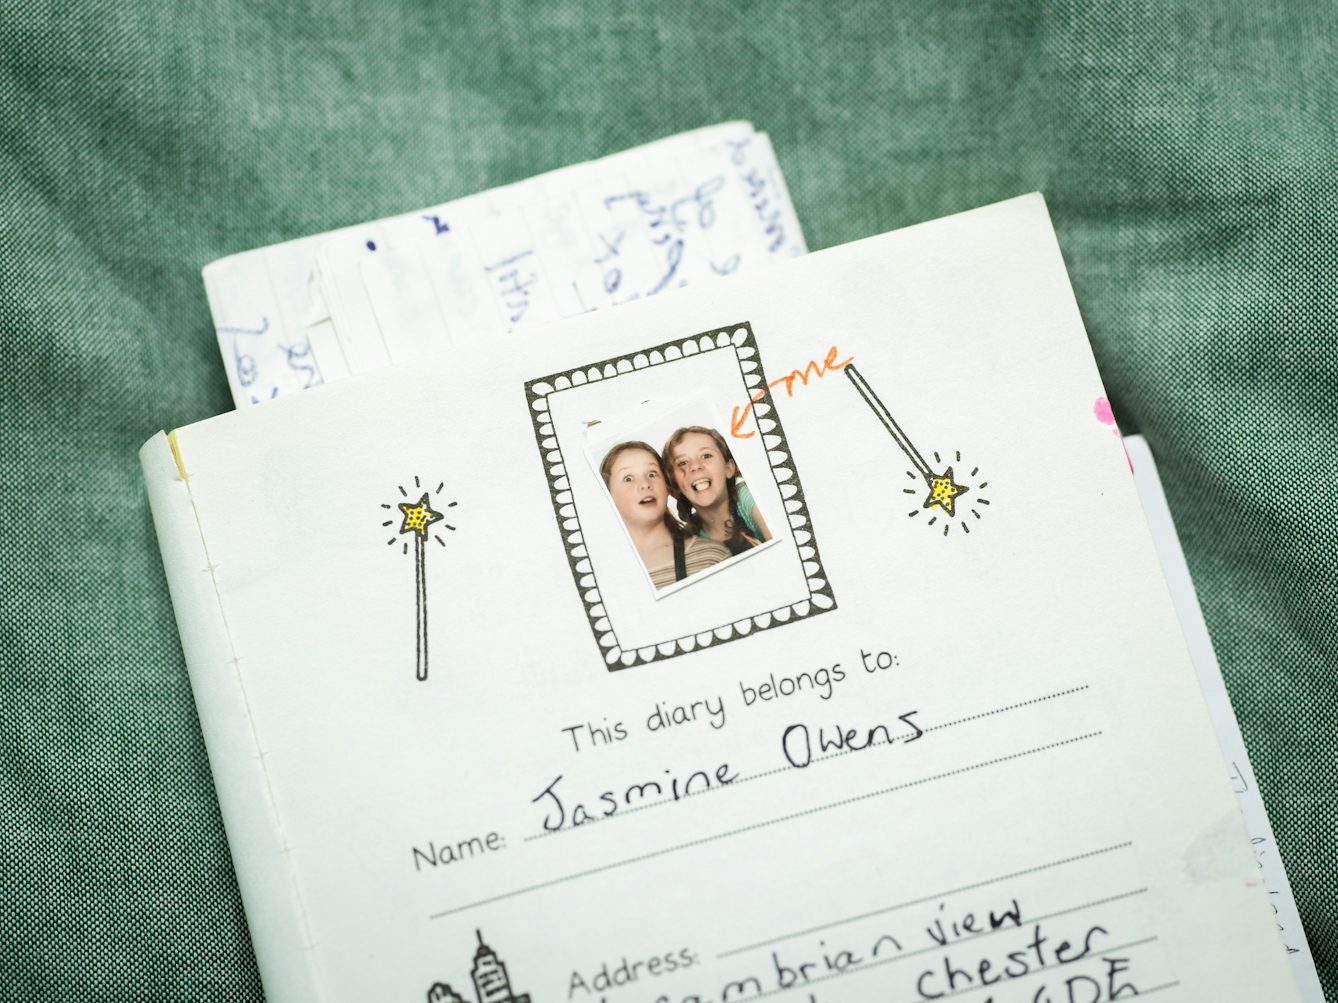 Photograph of the top half of the first page in a young child's paper diary. At the top of the page is a photo booth print of two young girls making silly faces to the camera. There is a hand drawn red arrow and the word 'me' pointing to one of the girls. Beside the photo are 2 illustrated wands with yellow stars on the top. Under the photo is written, 'This diary belongs to, Name: Jasmine Owens. Address....'. The diary has loose pages protruding from the top and is lying on a green coloured fabric background.